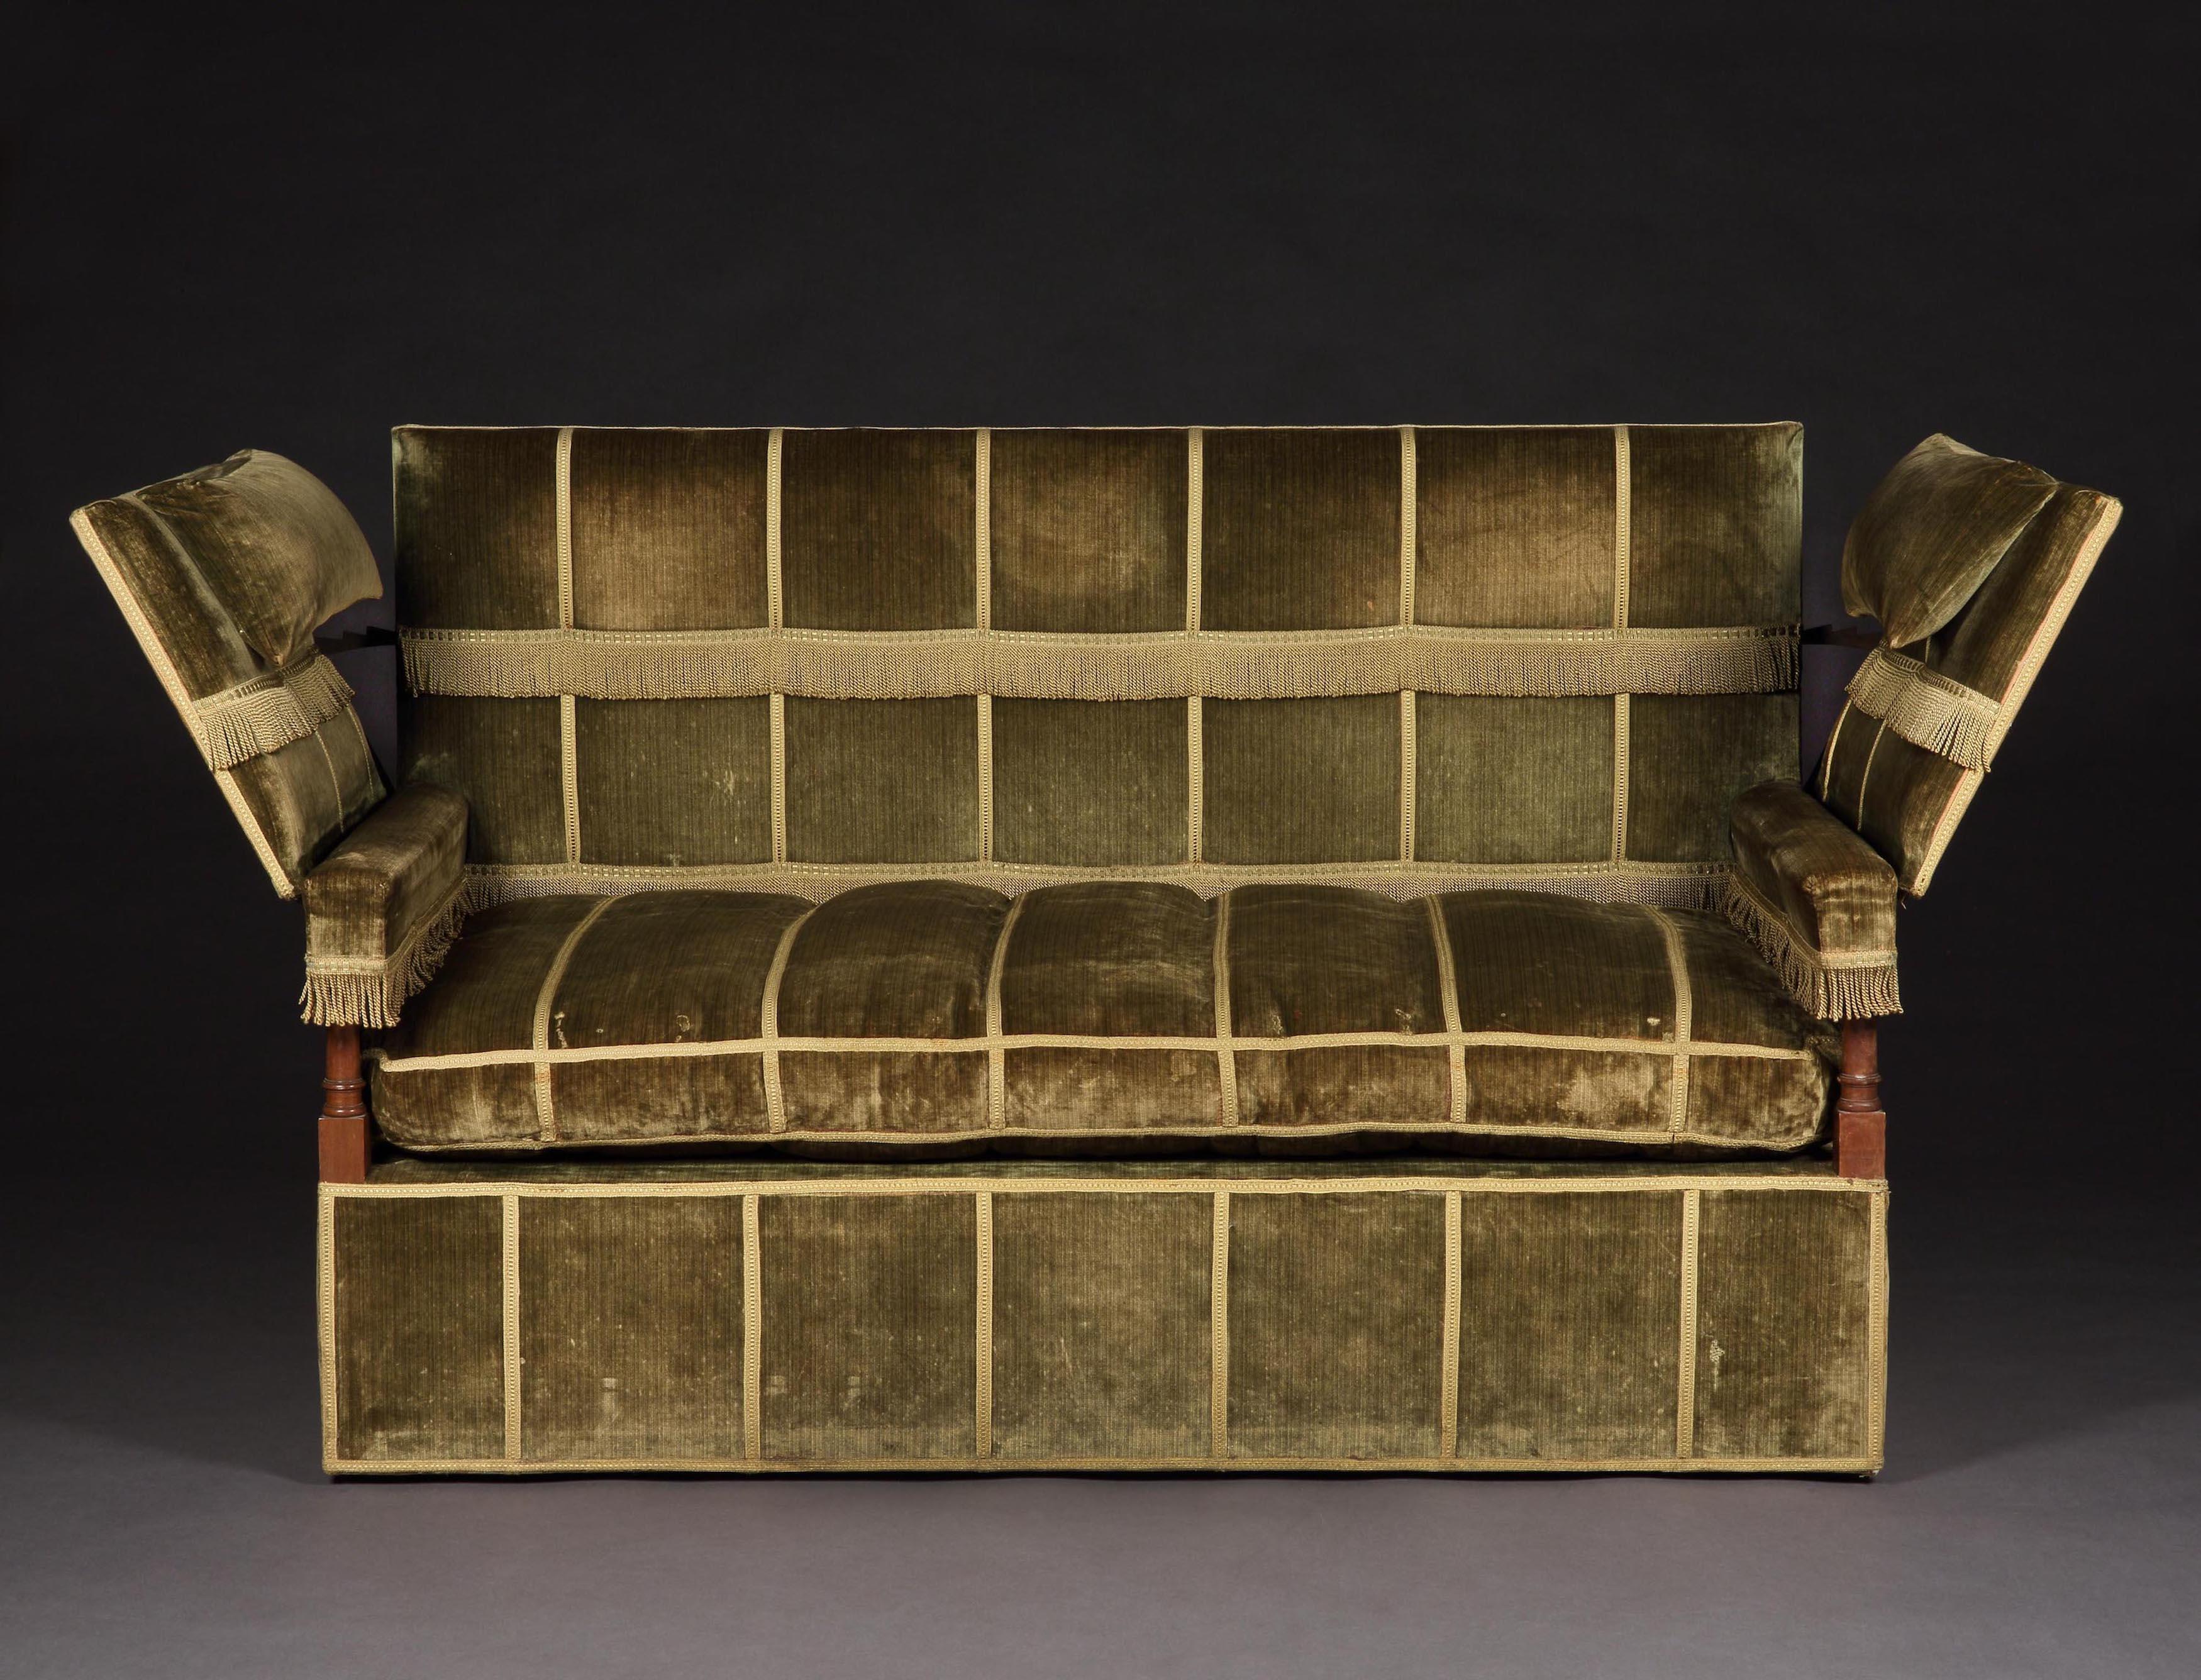 This is an early 20th century interpretation of the infamous, sumptuously, upholstered, 17th century, couch with hinged arm rests, found at Knole Park, Sevenoaks, Kent, the ancestral seat of the Sackvilles made by the most eminent upholsterer of the